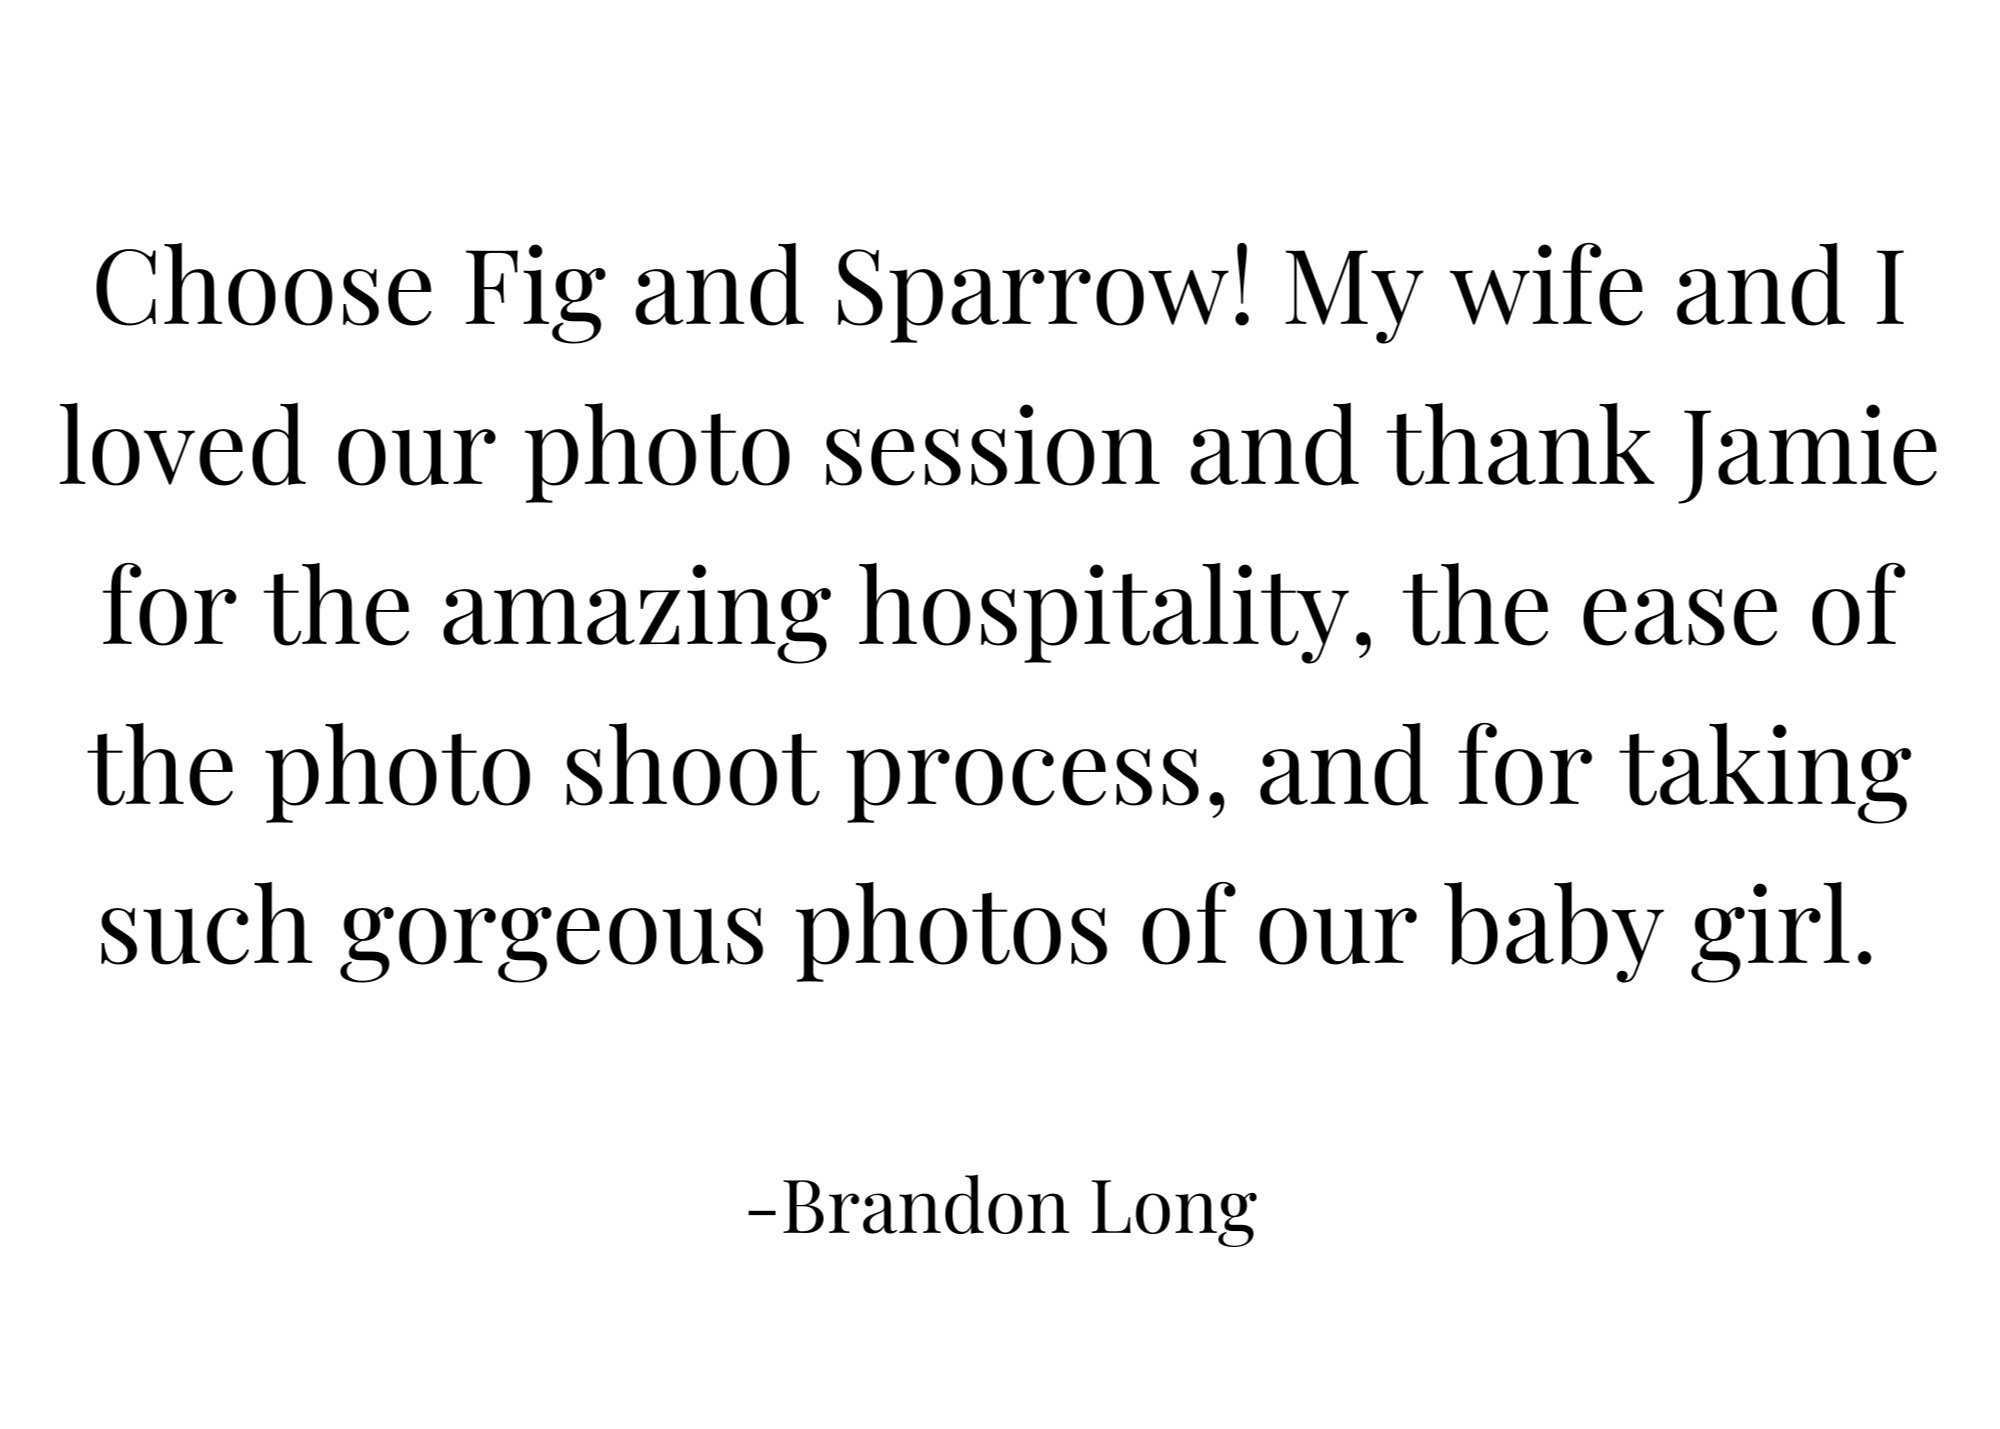 Choose+Fig+and+Sparrow%21+My+wife+and+I+loved+our+photo+session+and+thank+Jamie+for+the+amazing+hospitality%2C+the+ease+of+the+photo+shoot+process%2C+and+for+taking+such+gorgeous+photos+of+our+baby+girl.+Jamie+was+ki+%282%29.jpg